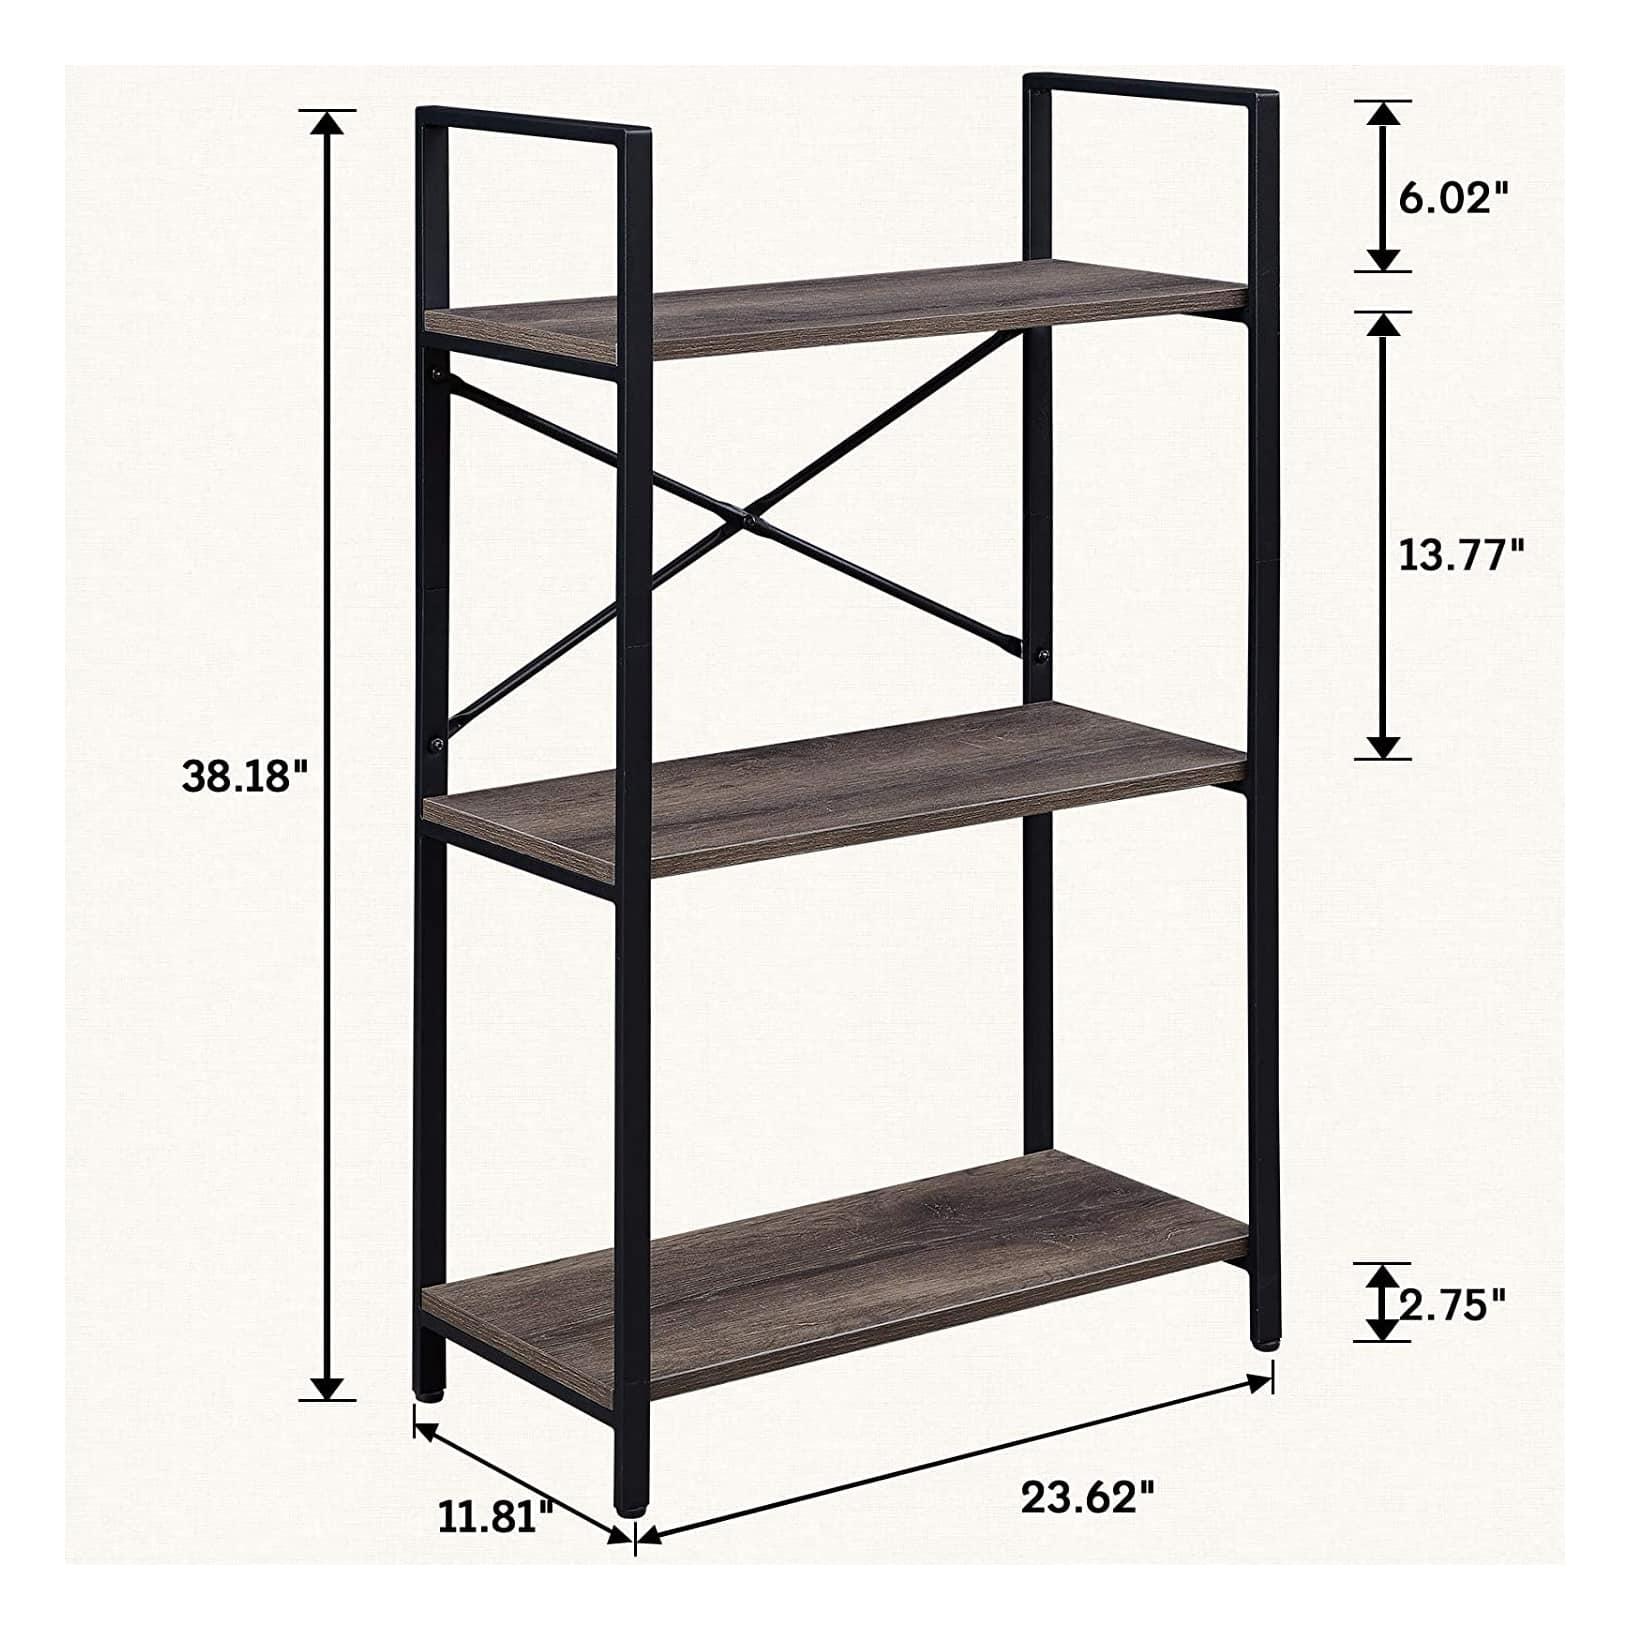 Top 10 Best Industrial Bookshelves in 2022 Reviews - Show Guide Me